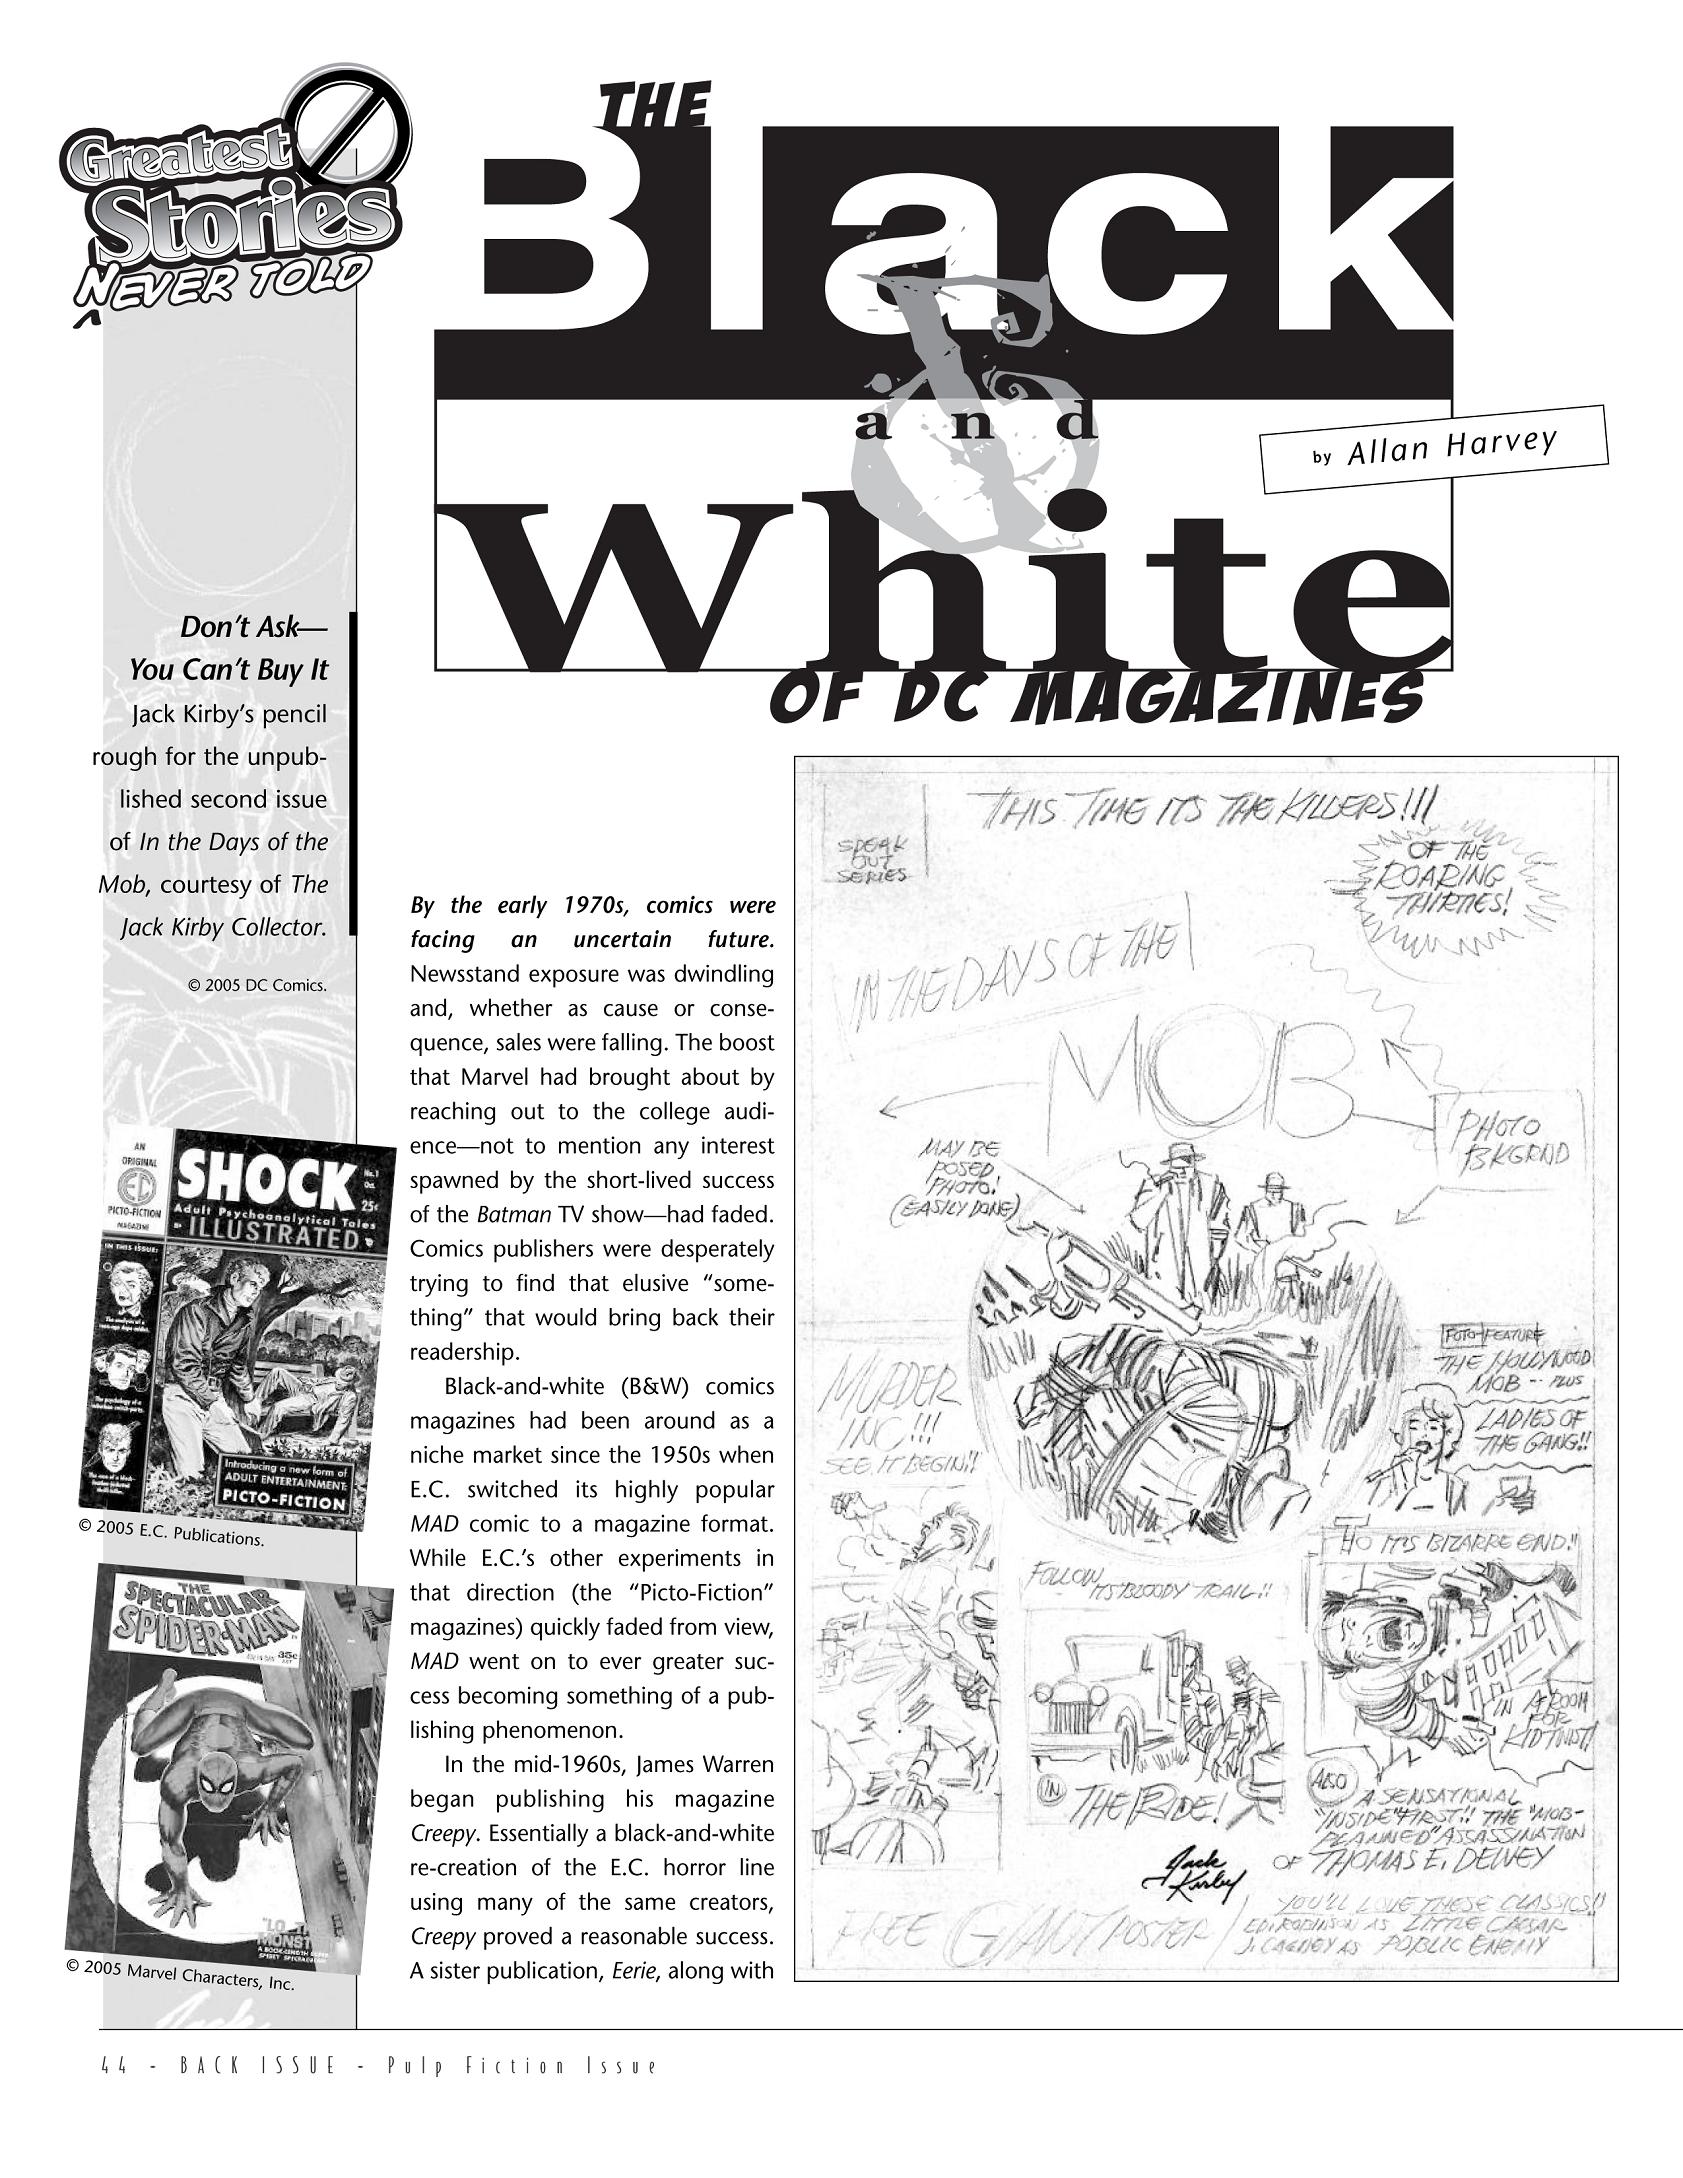 Read online Back Issue comic -  Issue #10 - 46